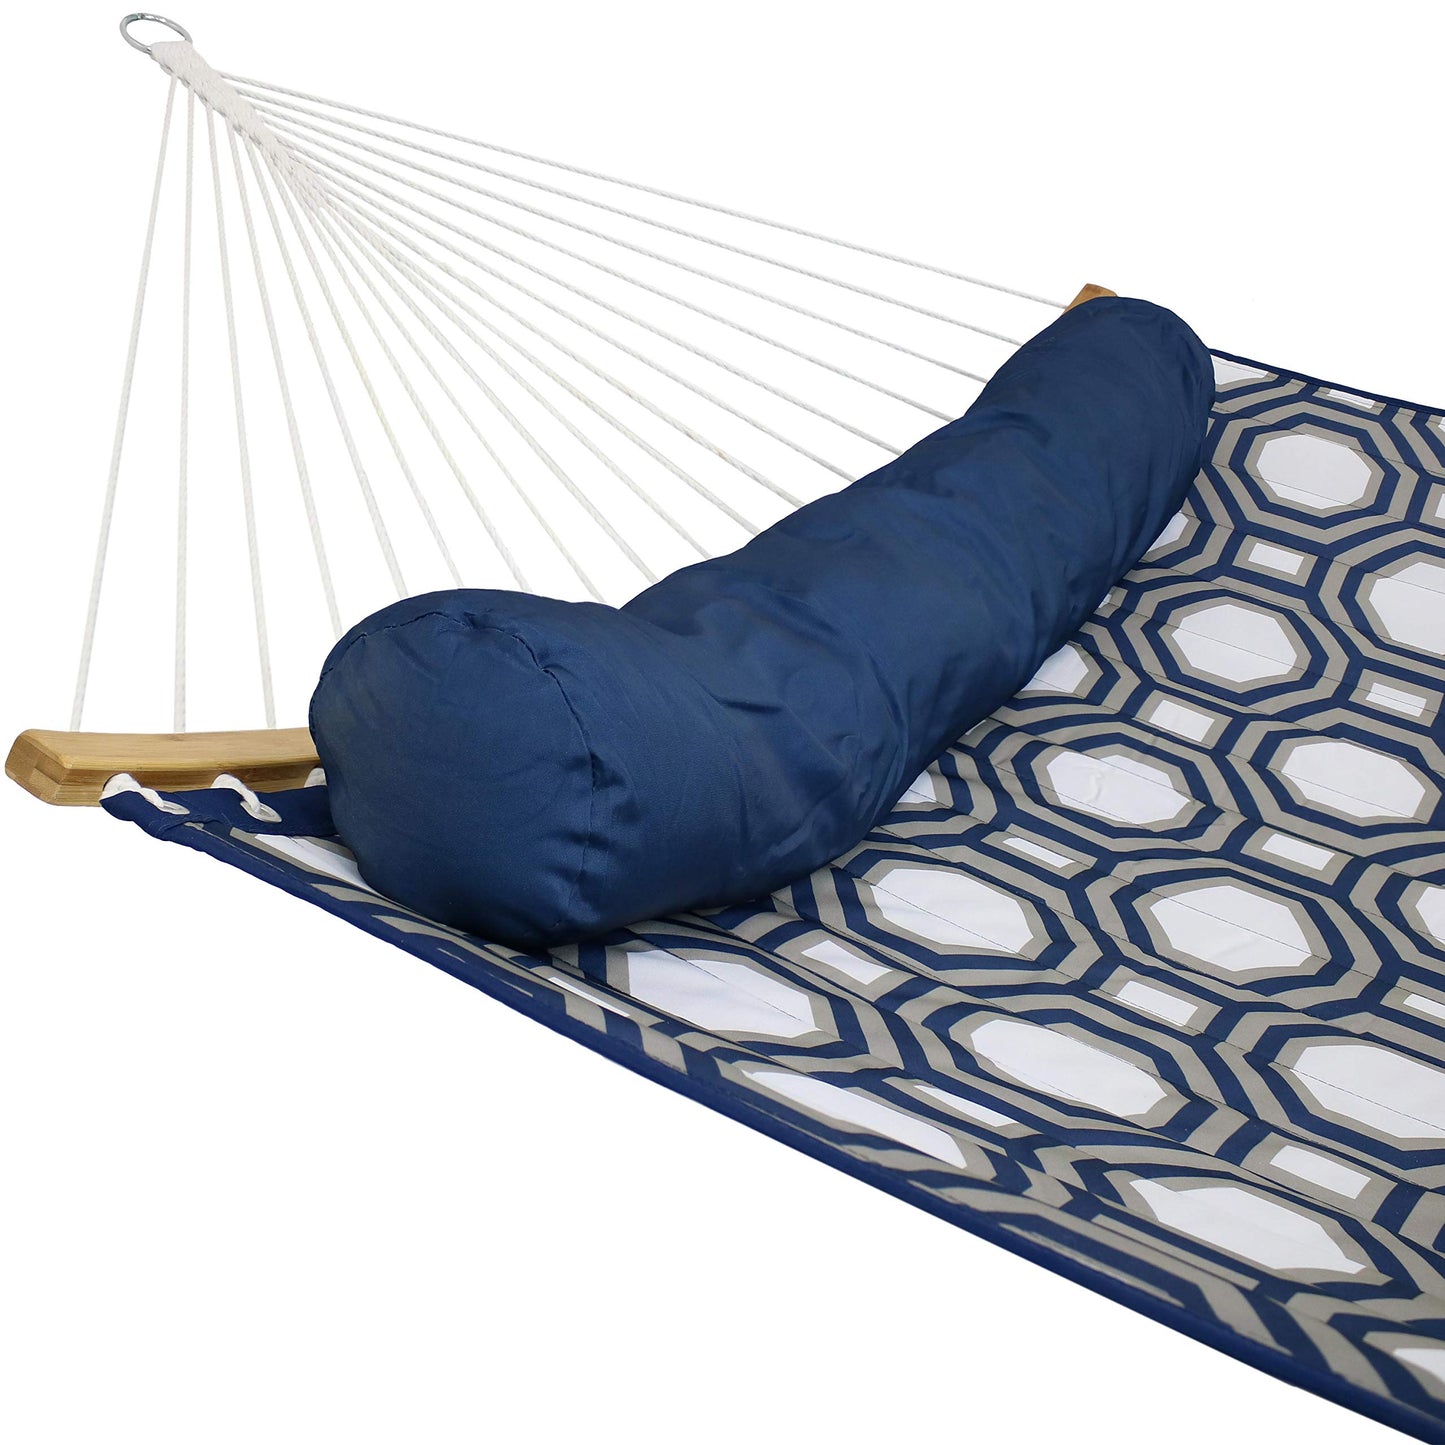 Quilted Double Hammock with 2 Curved Bamboo Spreader Bars - Sunnydaze